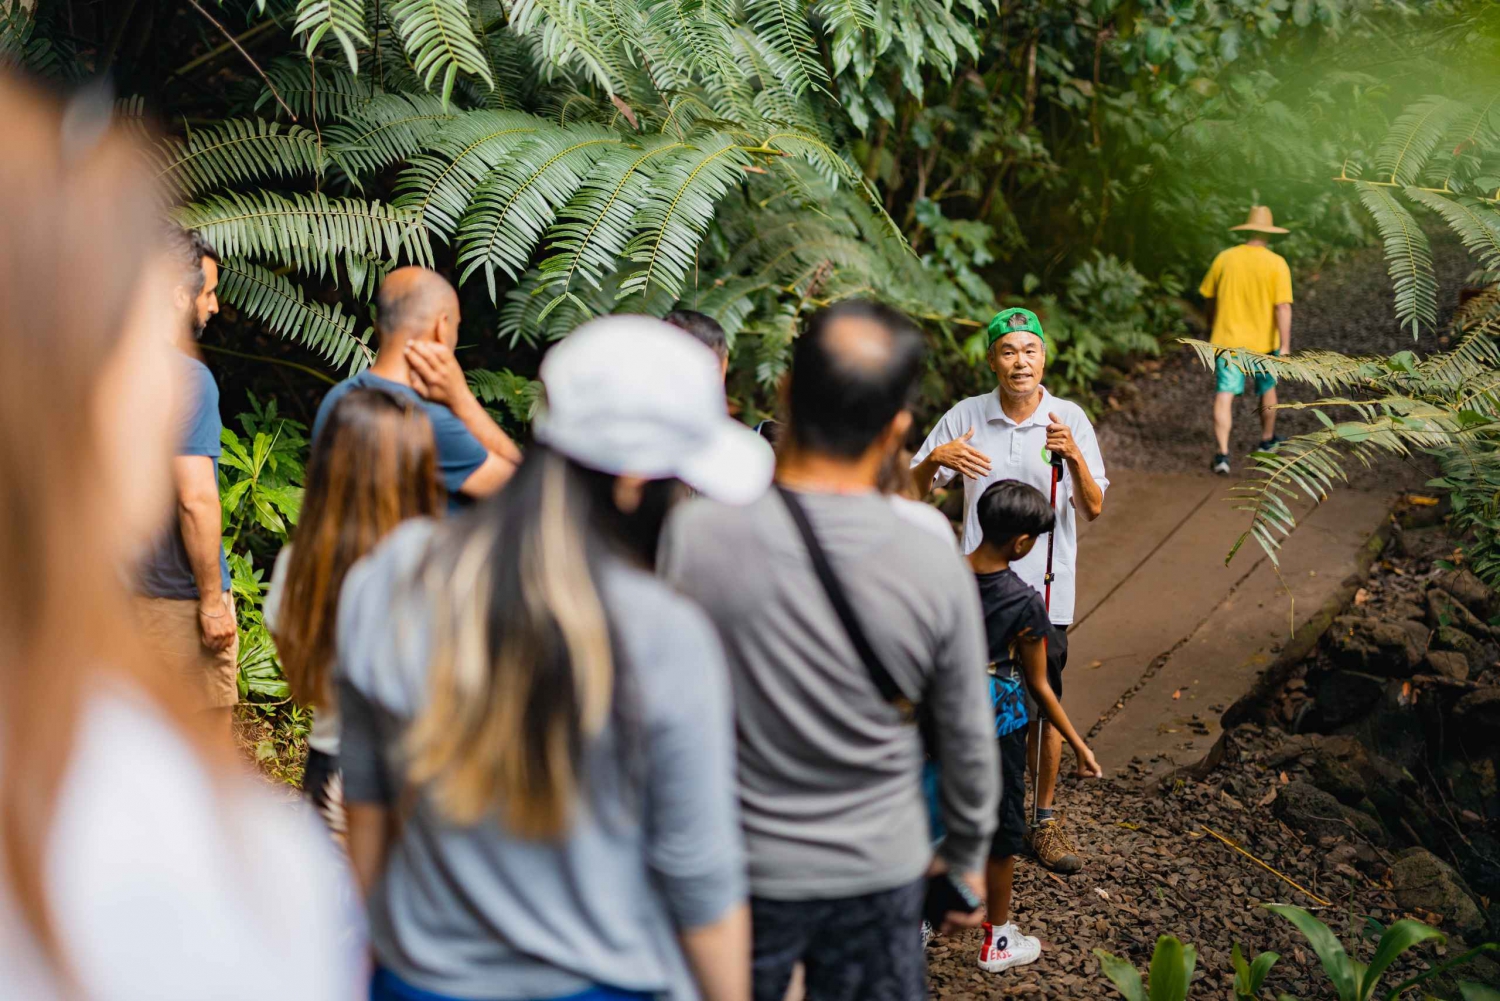 Oahu: Manoa Falls Waterfall Hike with Lunch and Transfers